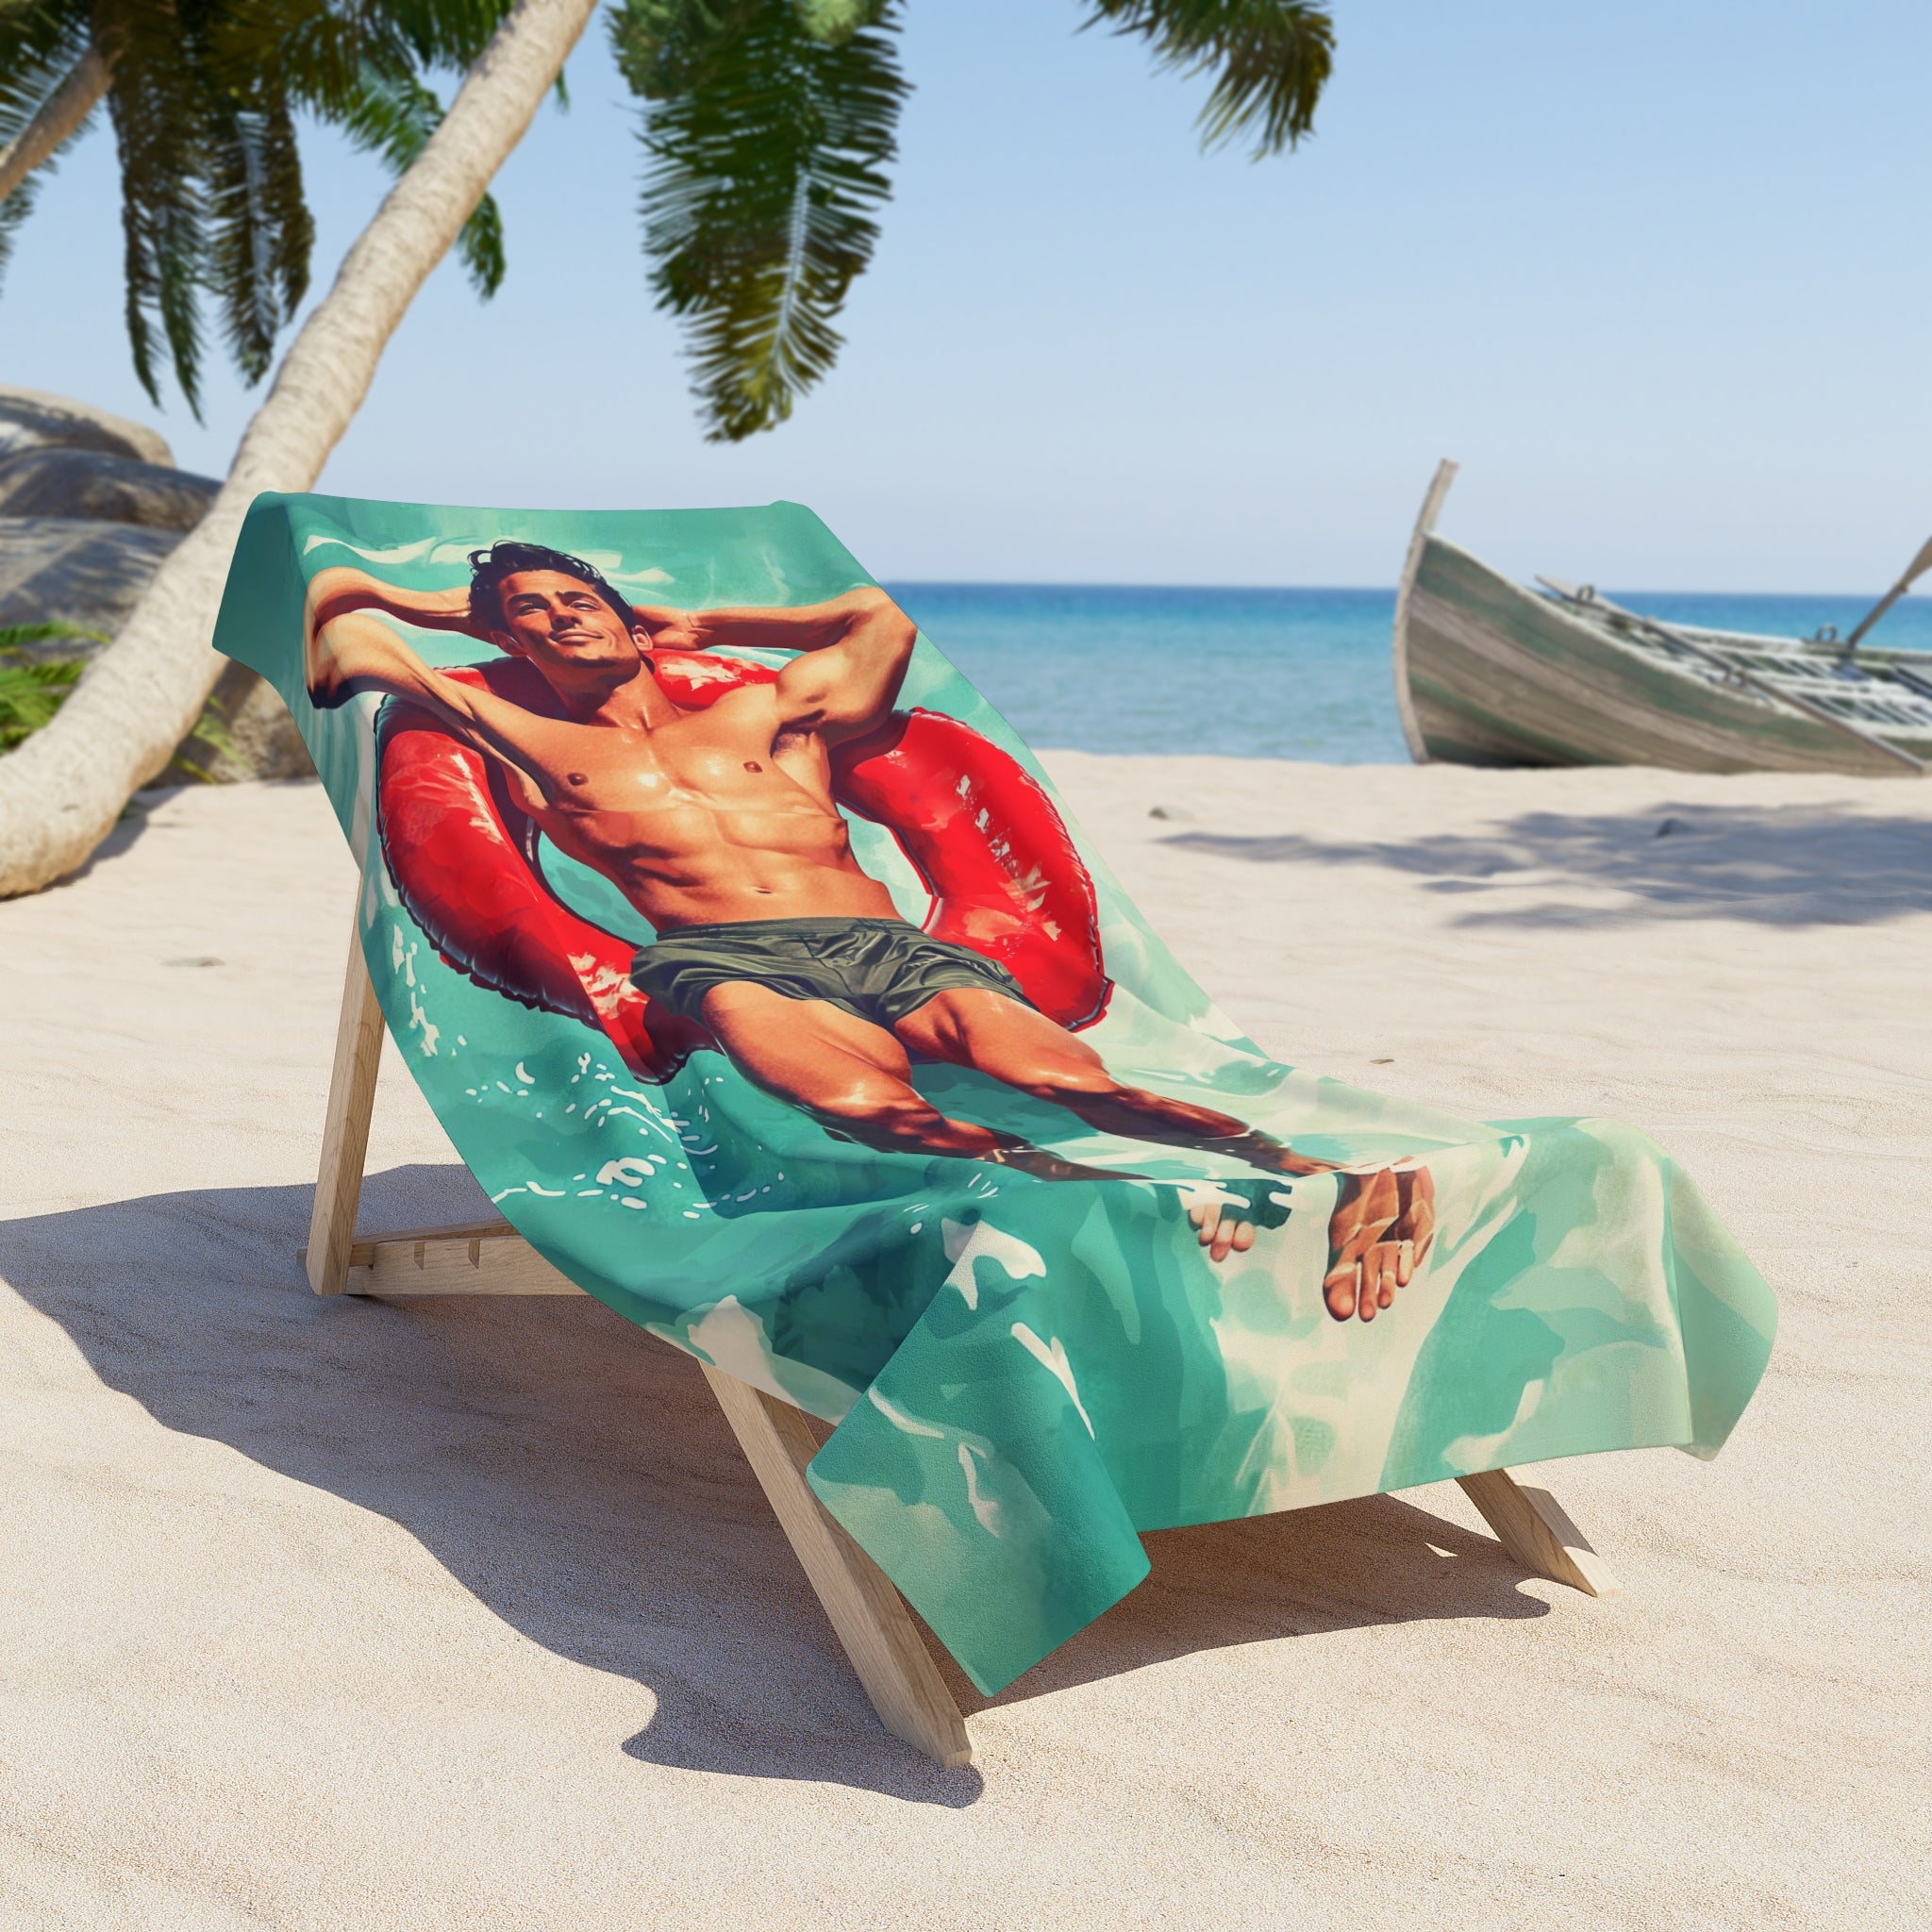 Man on a red pool float Beach Towel 36" x 72"